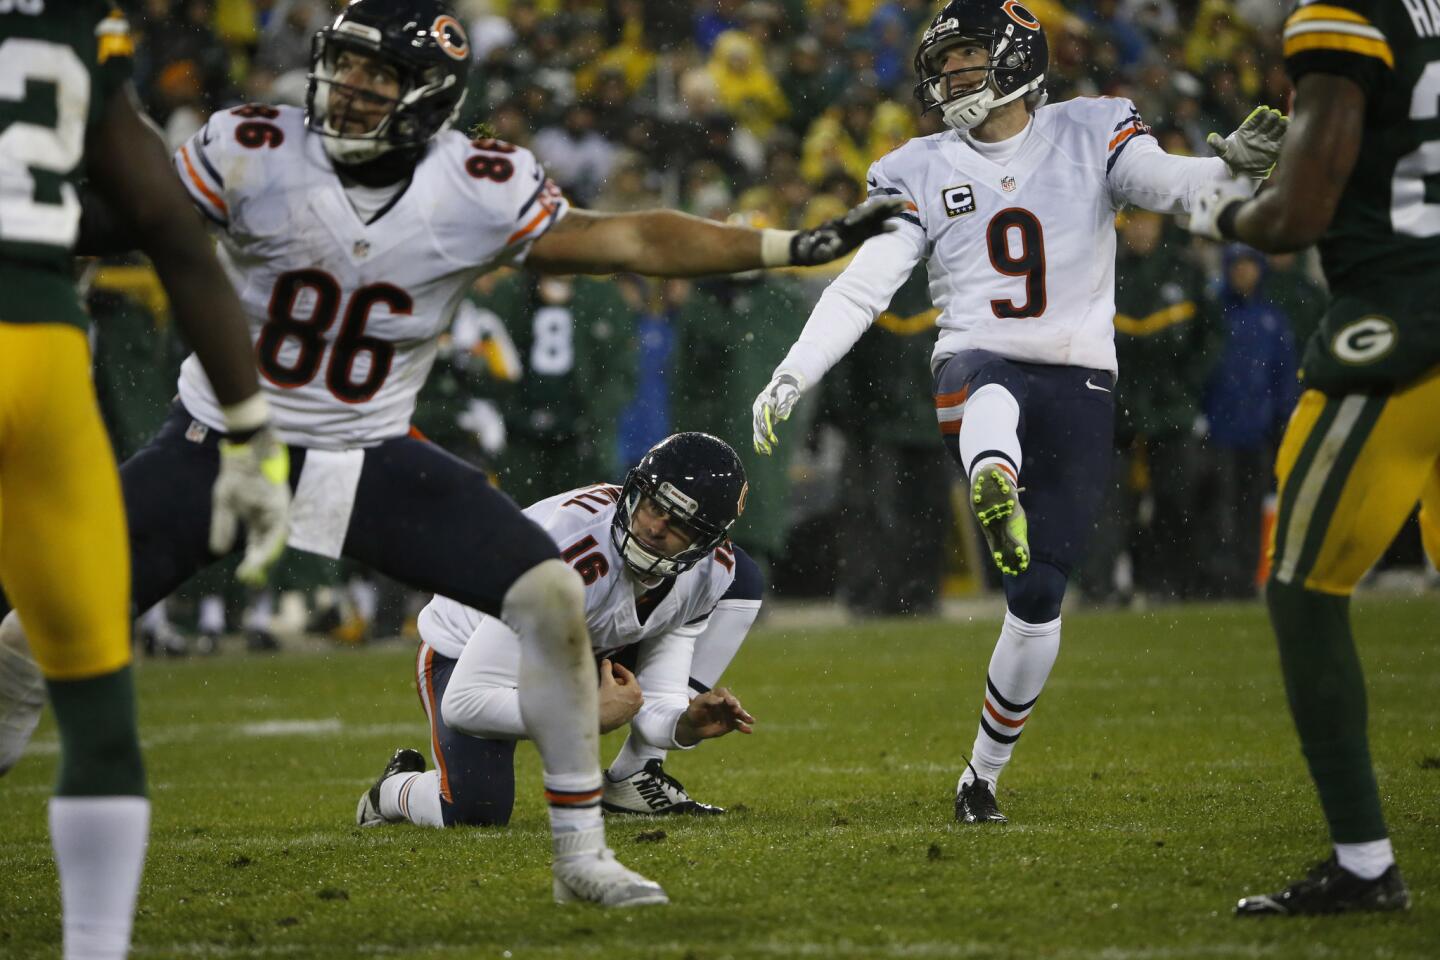 Robbie Gould watches after he kicks a 21-yard field goal in the fourth quarter against the Packers.